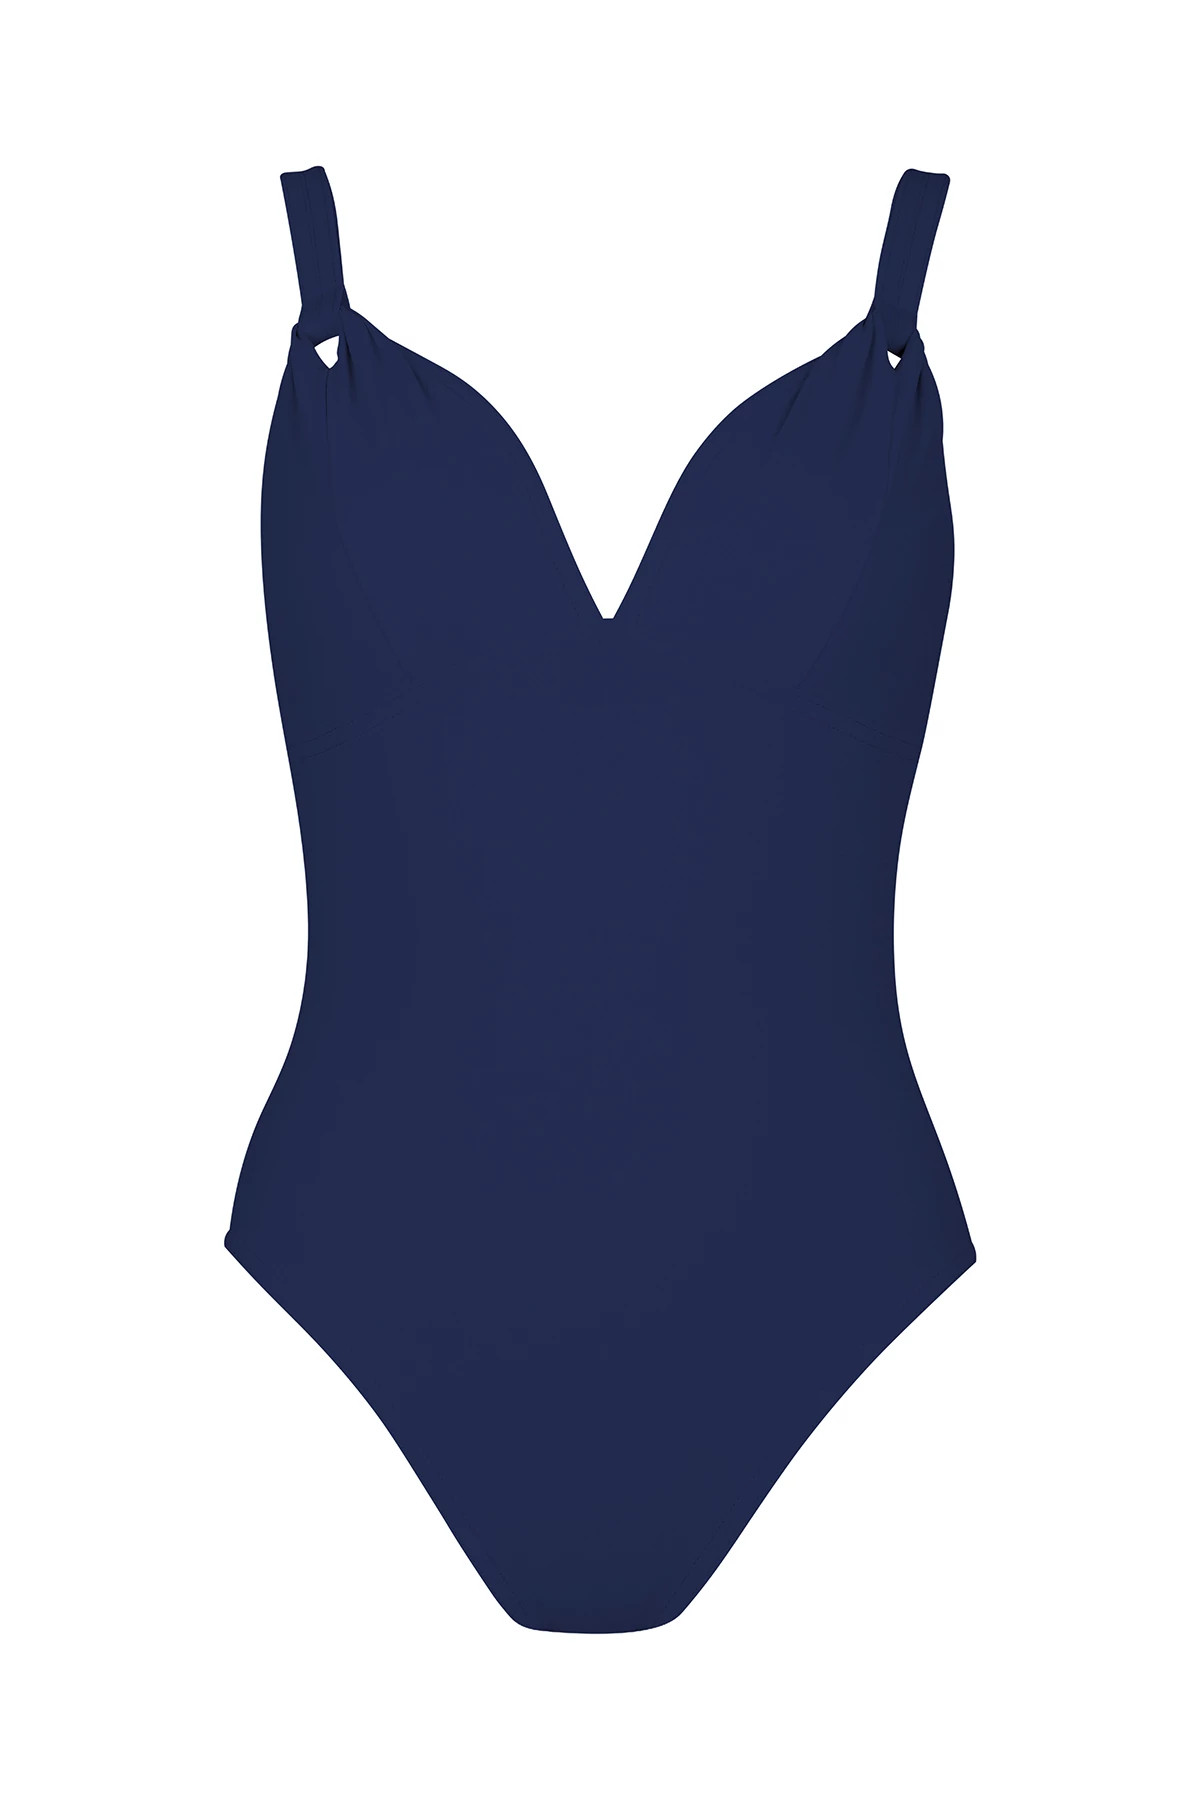 NAVY Arlo Underwire One Piece Swimsuit image number 3